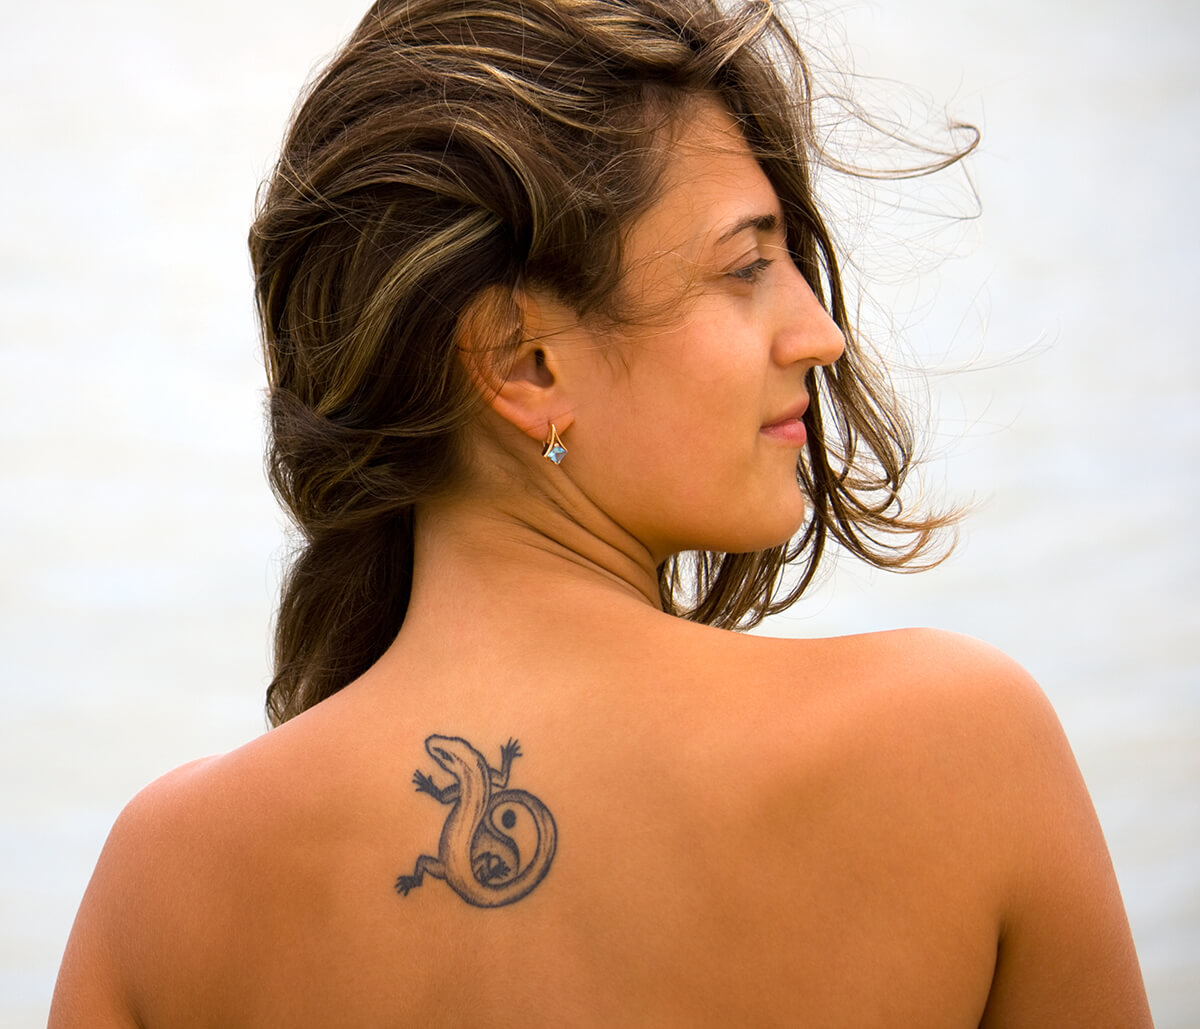 PicoSure laser for tattoo removal in Jupiter, FL is effective